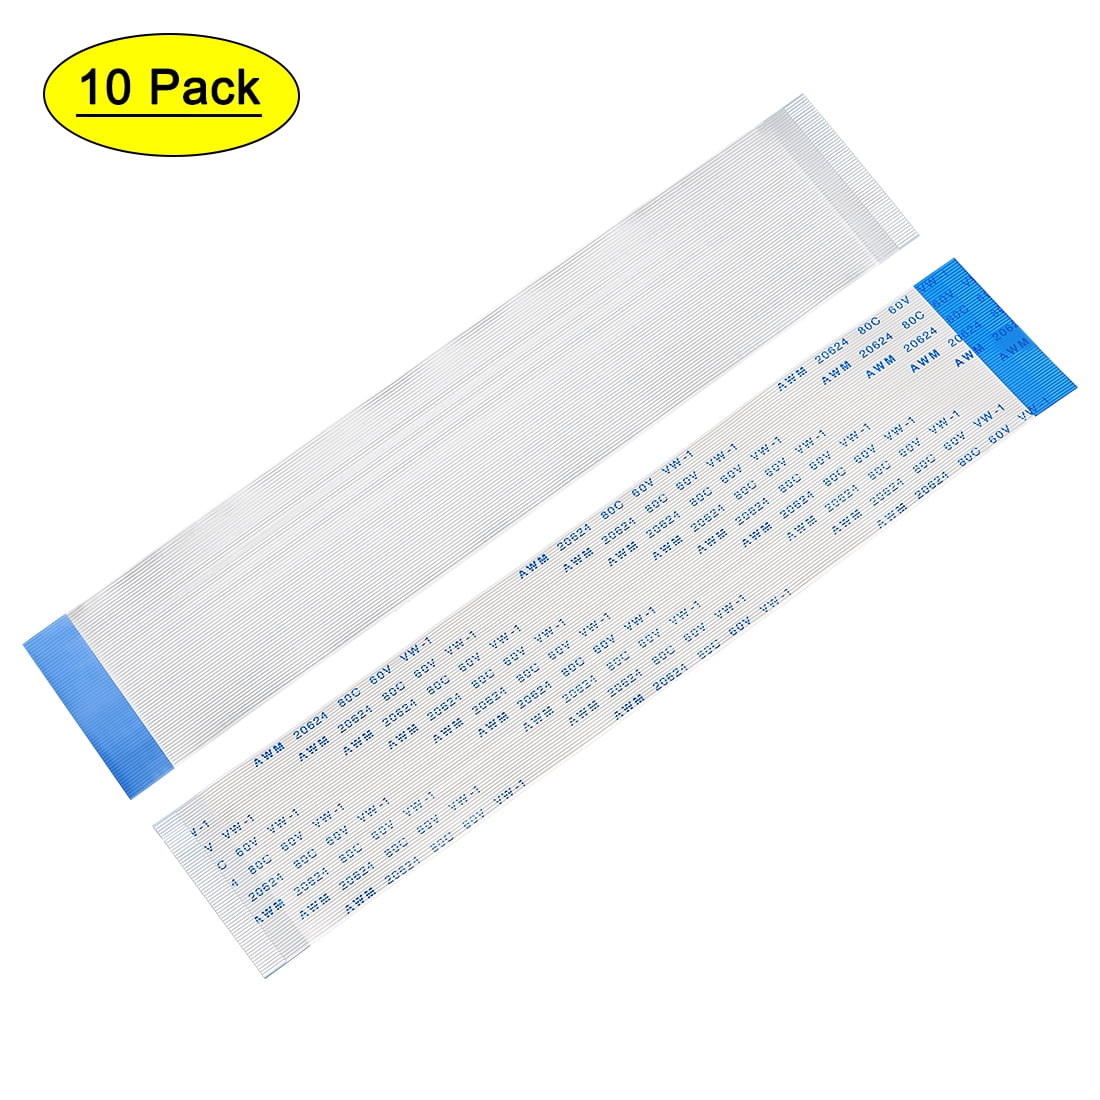 Flat Flexible Ribbon Cable Pitch 0.5 mm 60 Pin 150 mm Type A FFC 